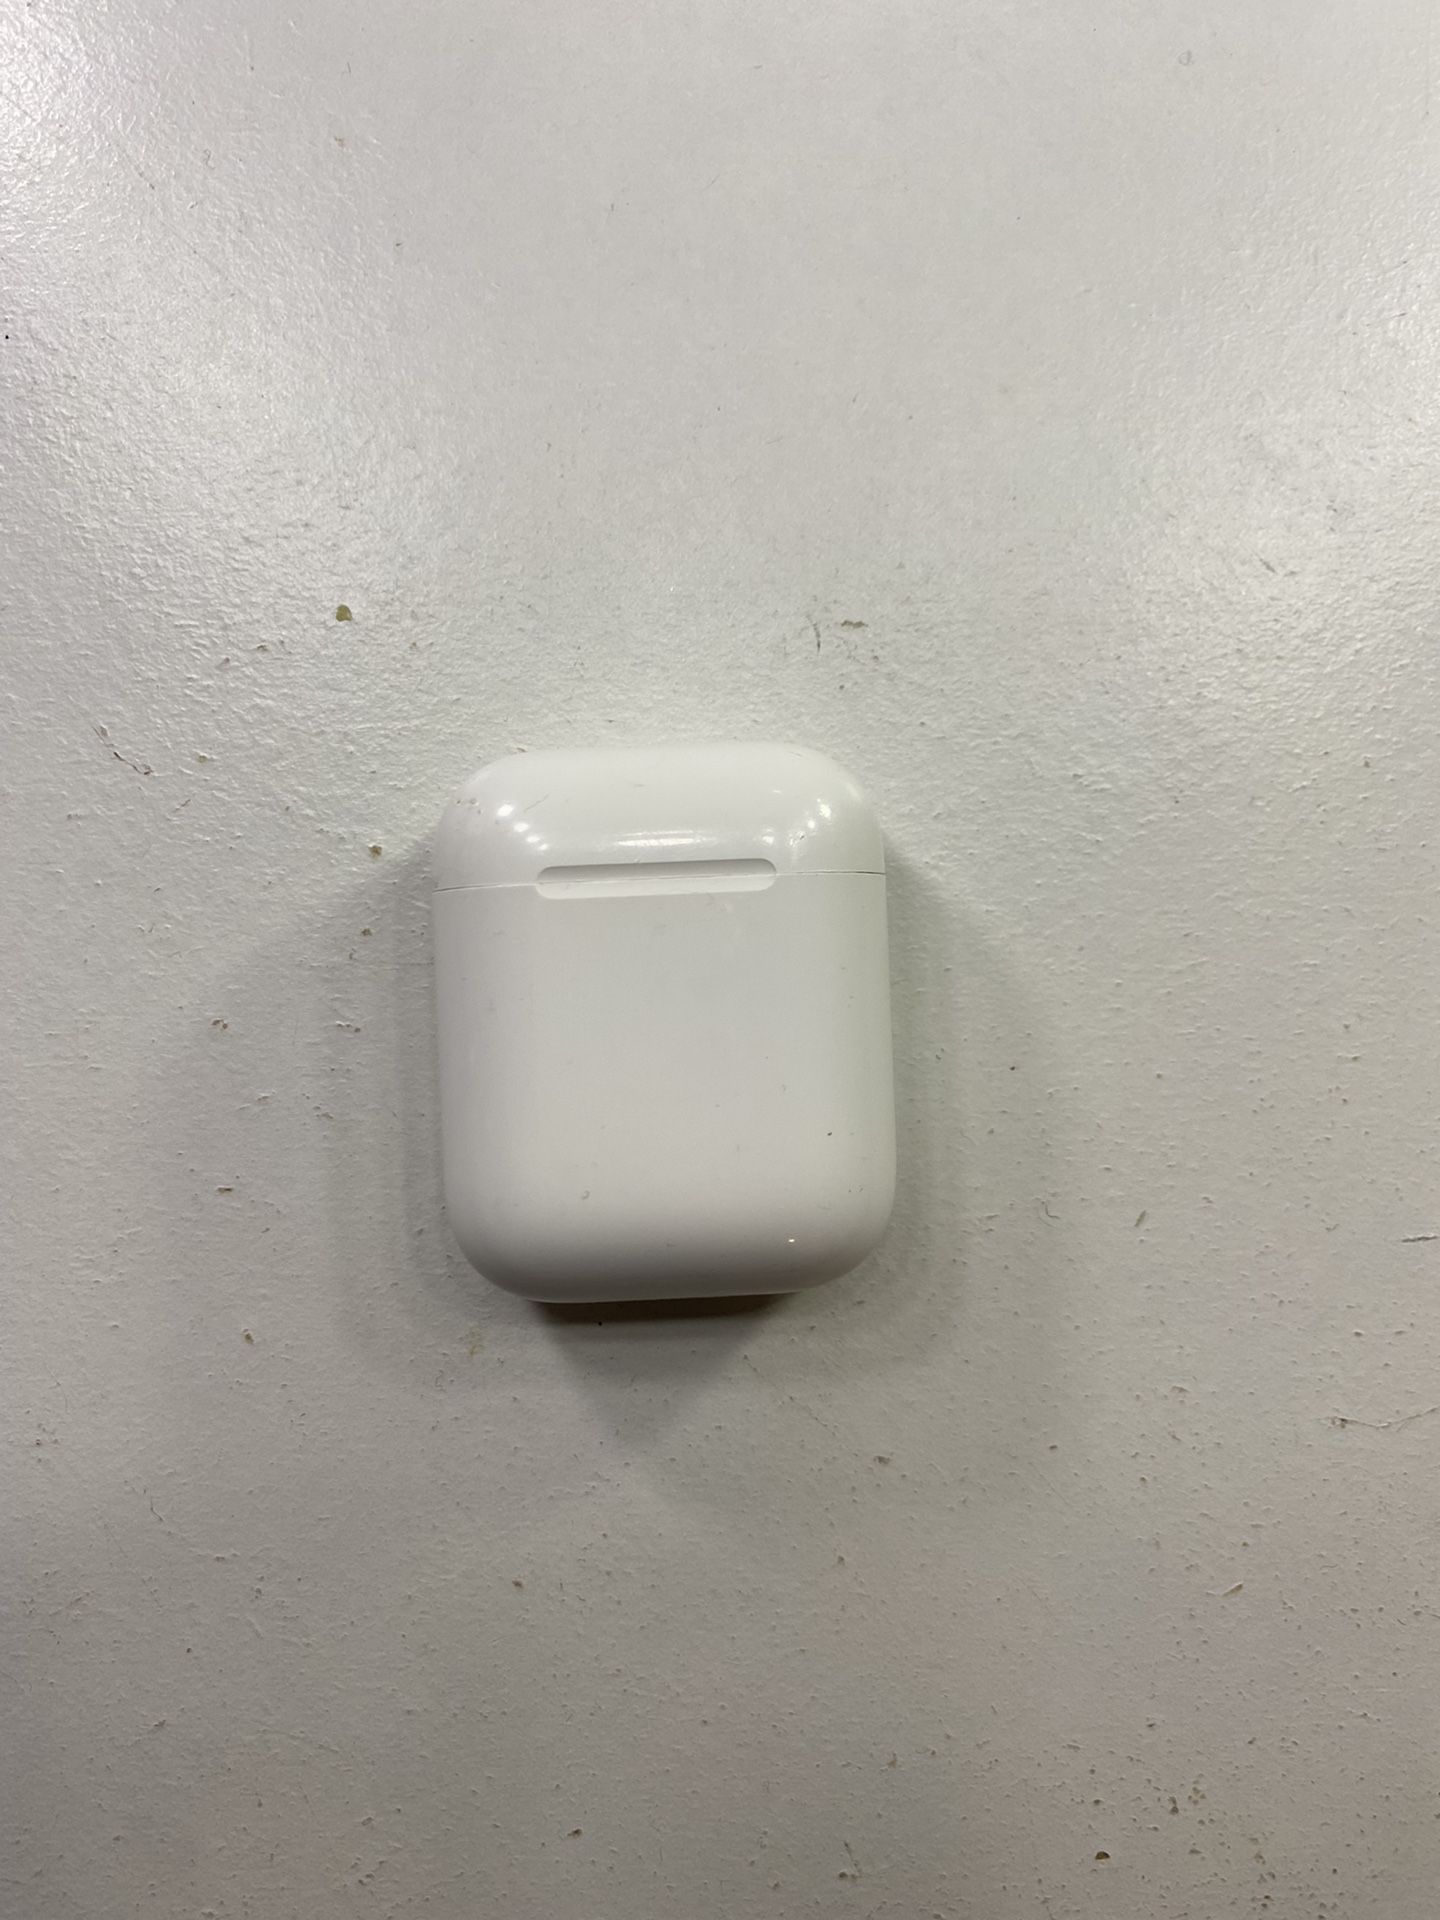 Apple AirPods Charger Case